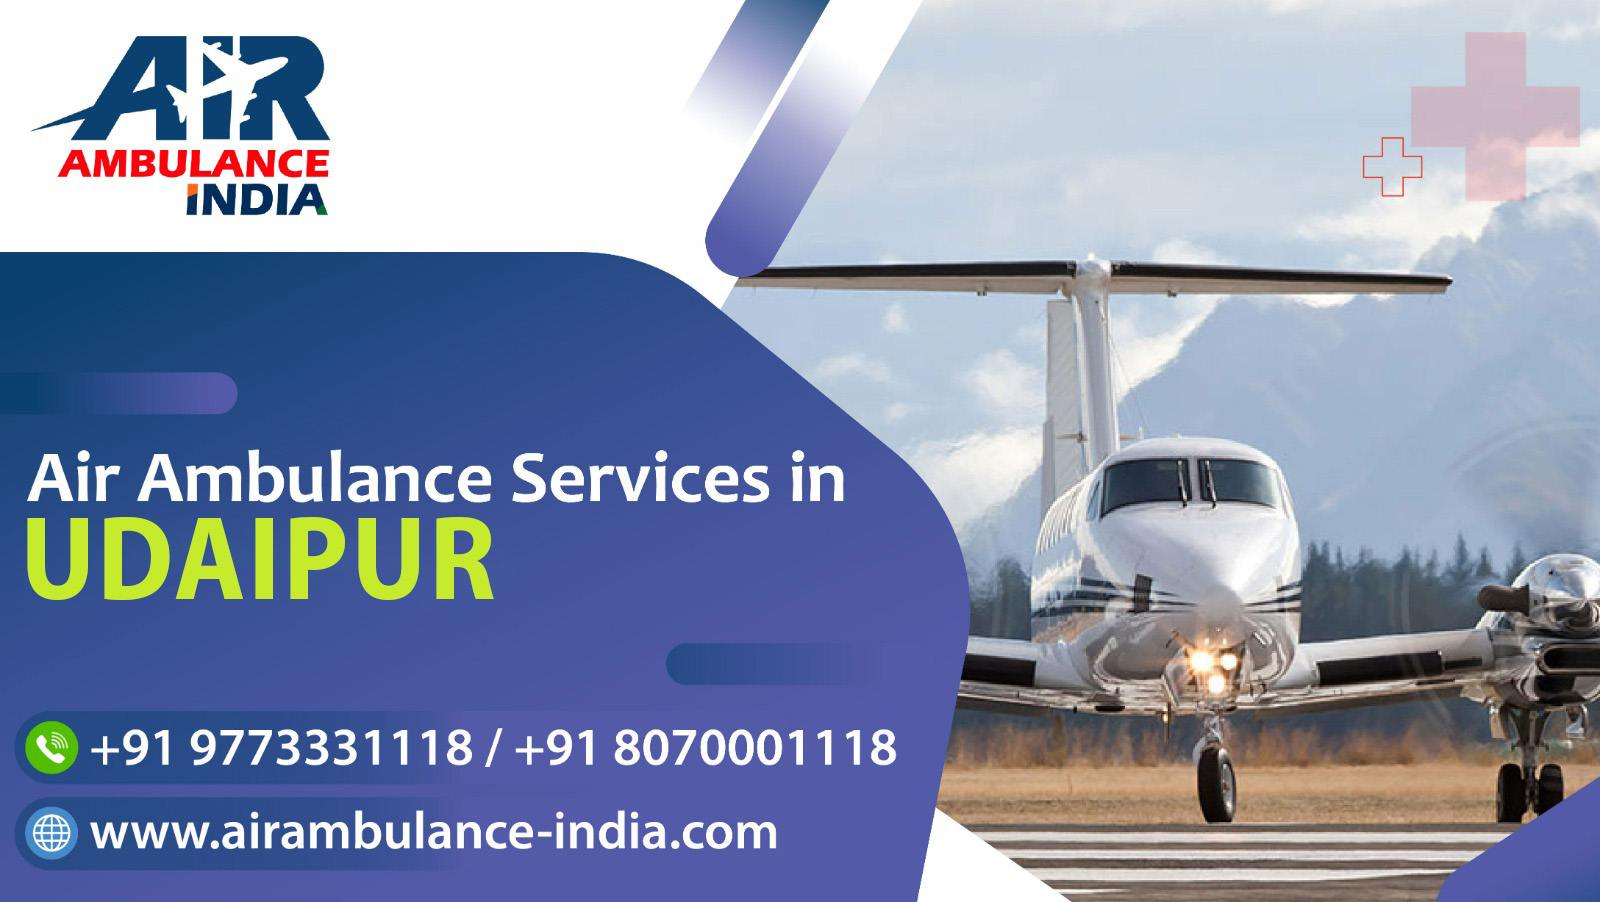 Ambulance Services in Udaipur